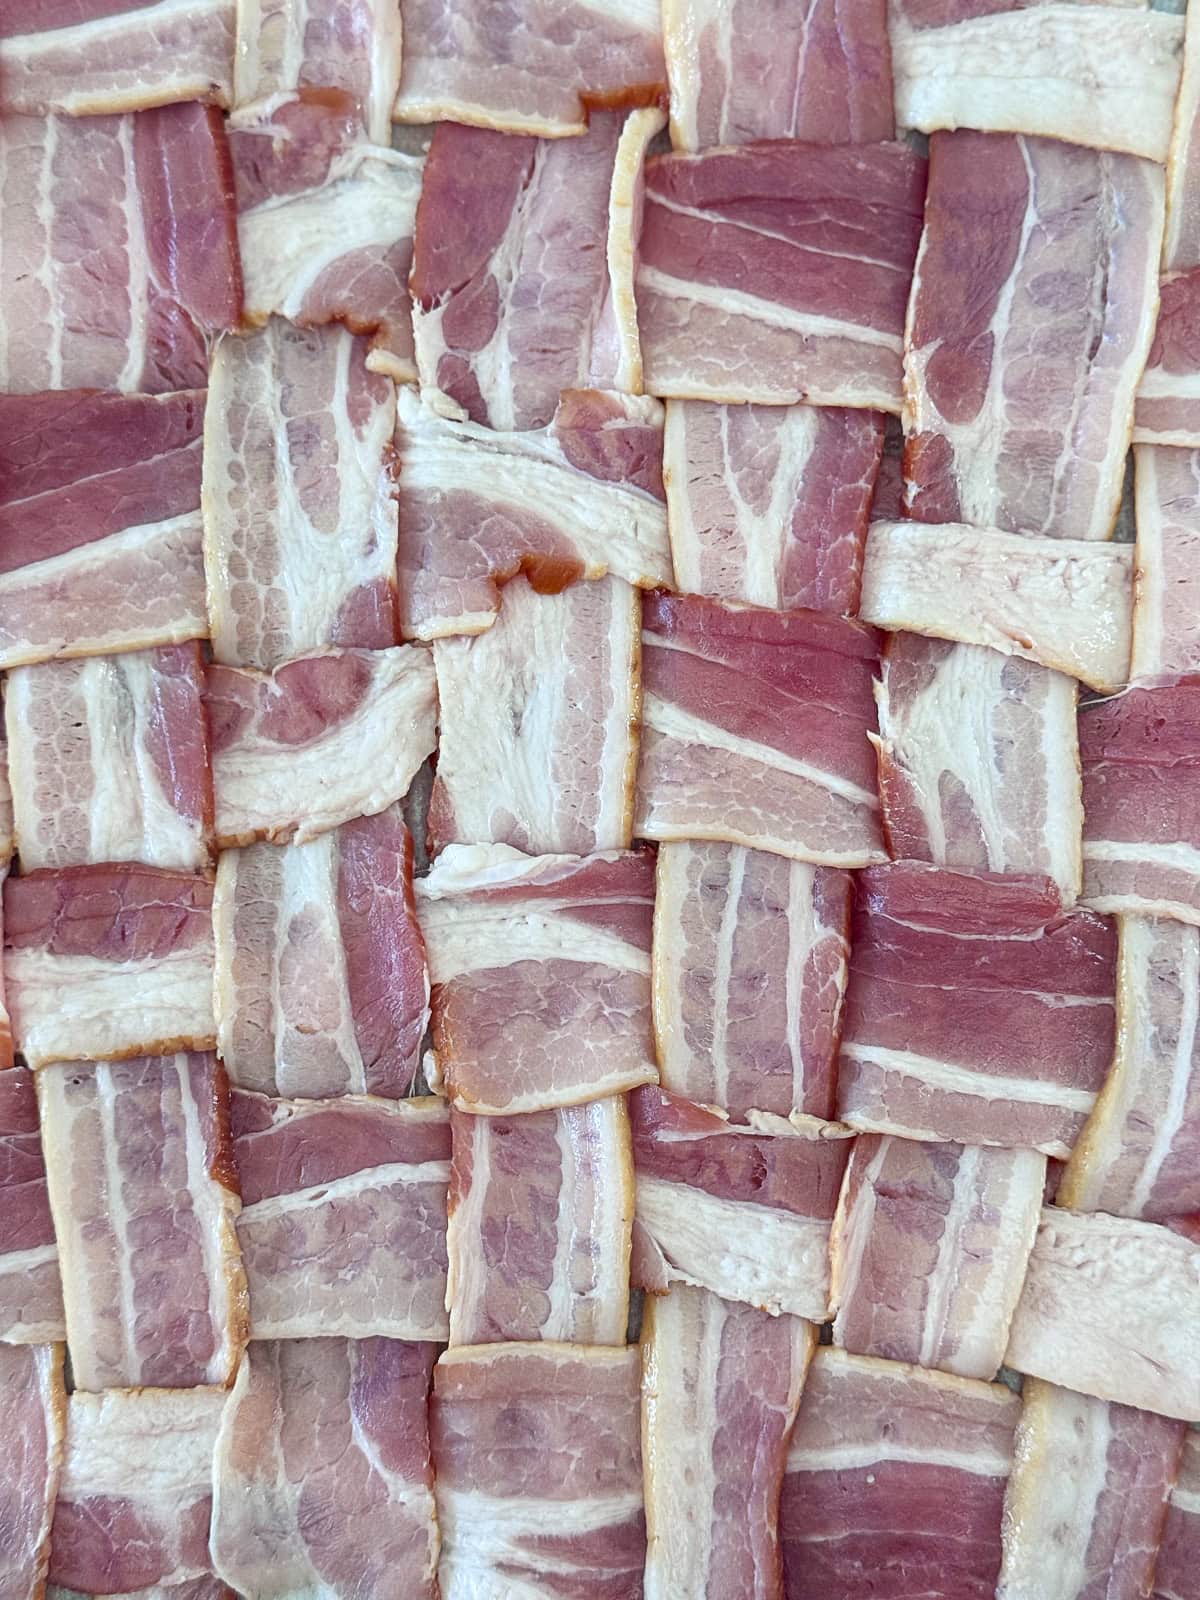 Bacon Weaved Together